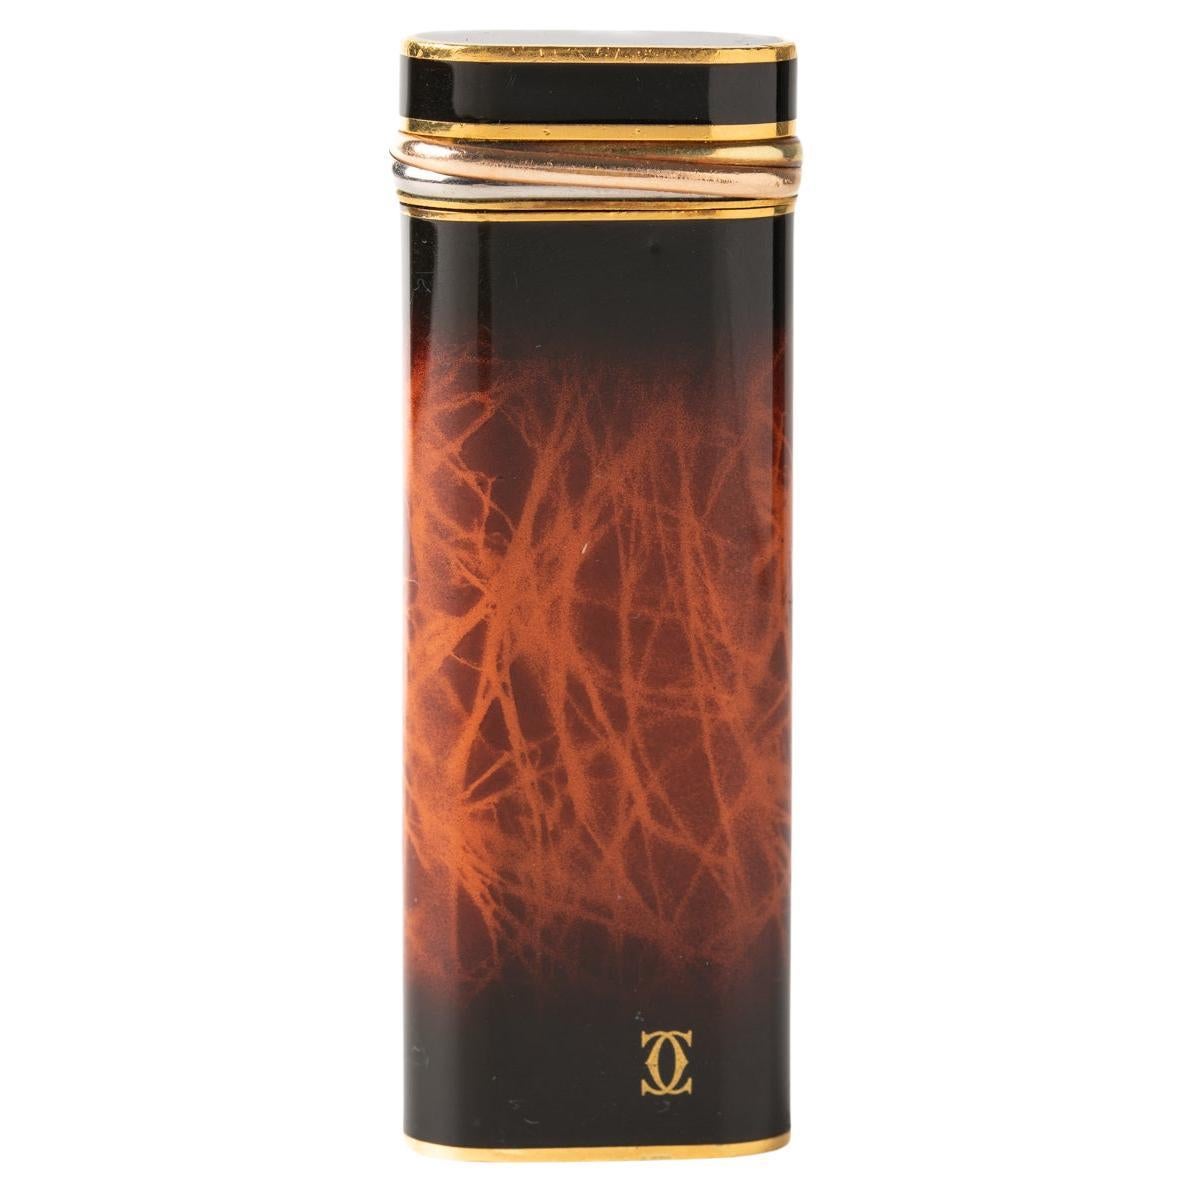 Vintage Cartier 'Trinity" Gold Plated Lighter